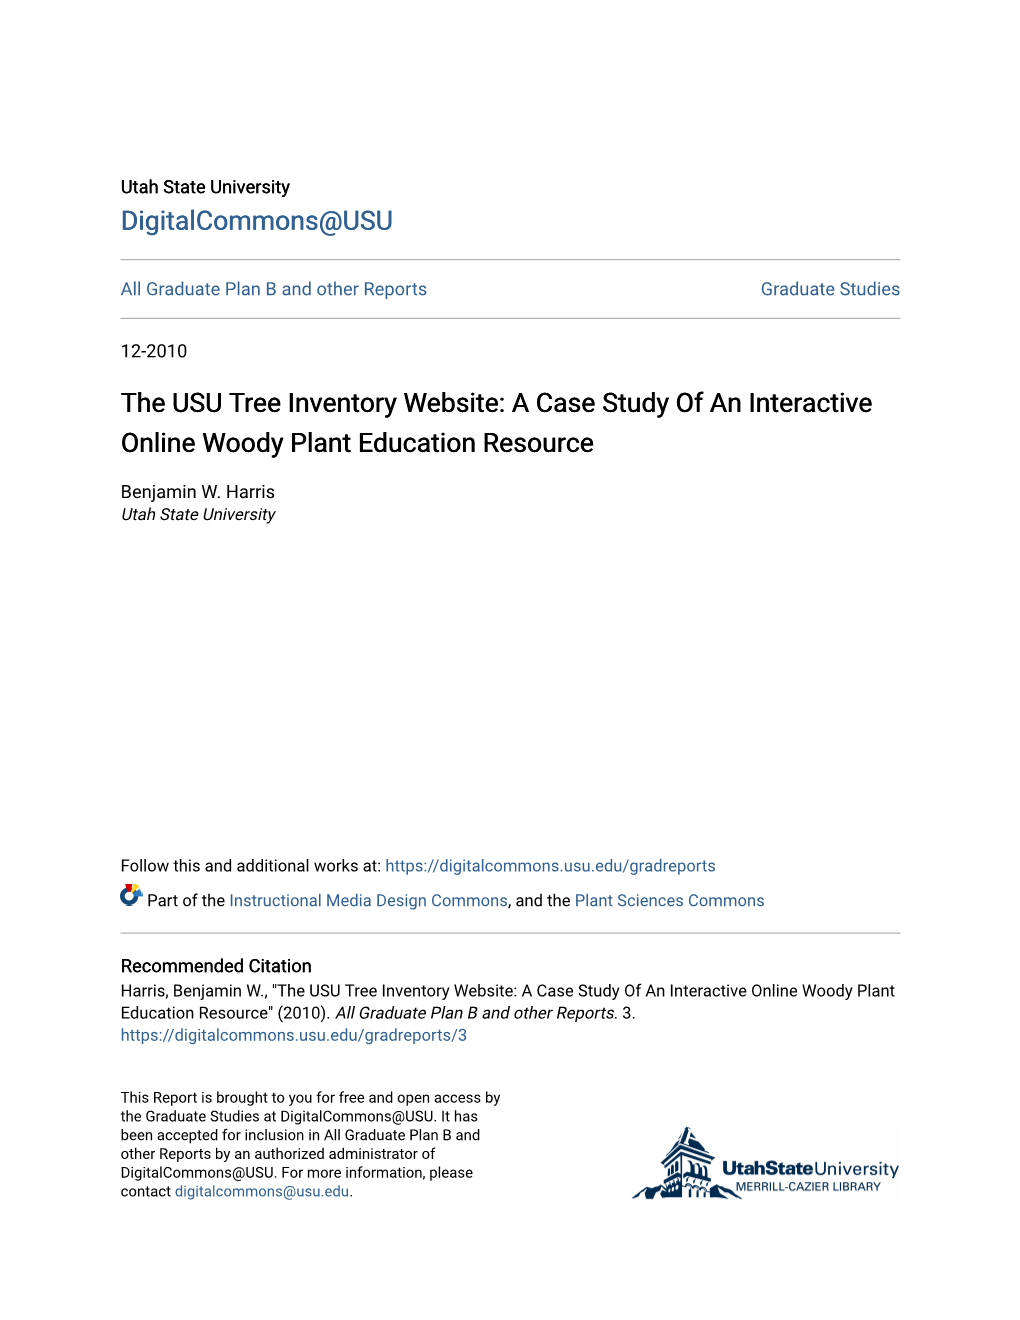 The USU Tree Inventory Website: a Case Study of an Interactive Online Woody Plant Education Resource